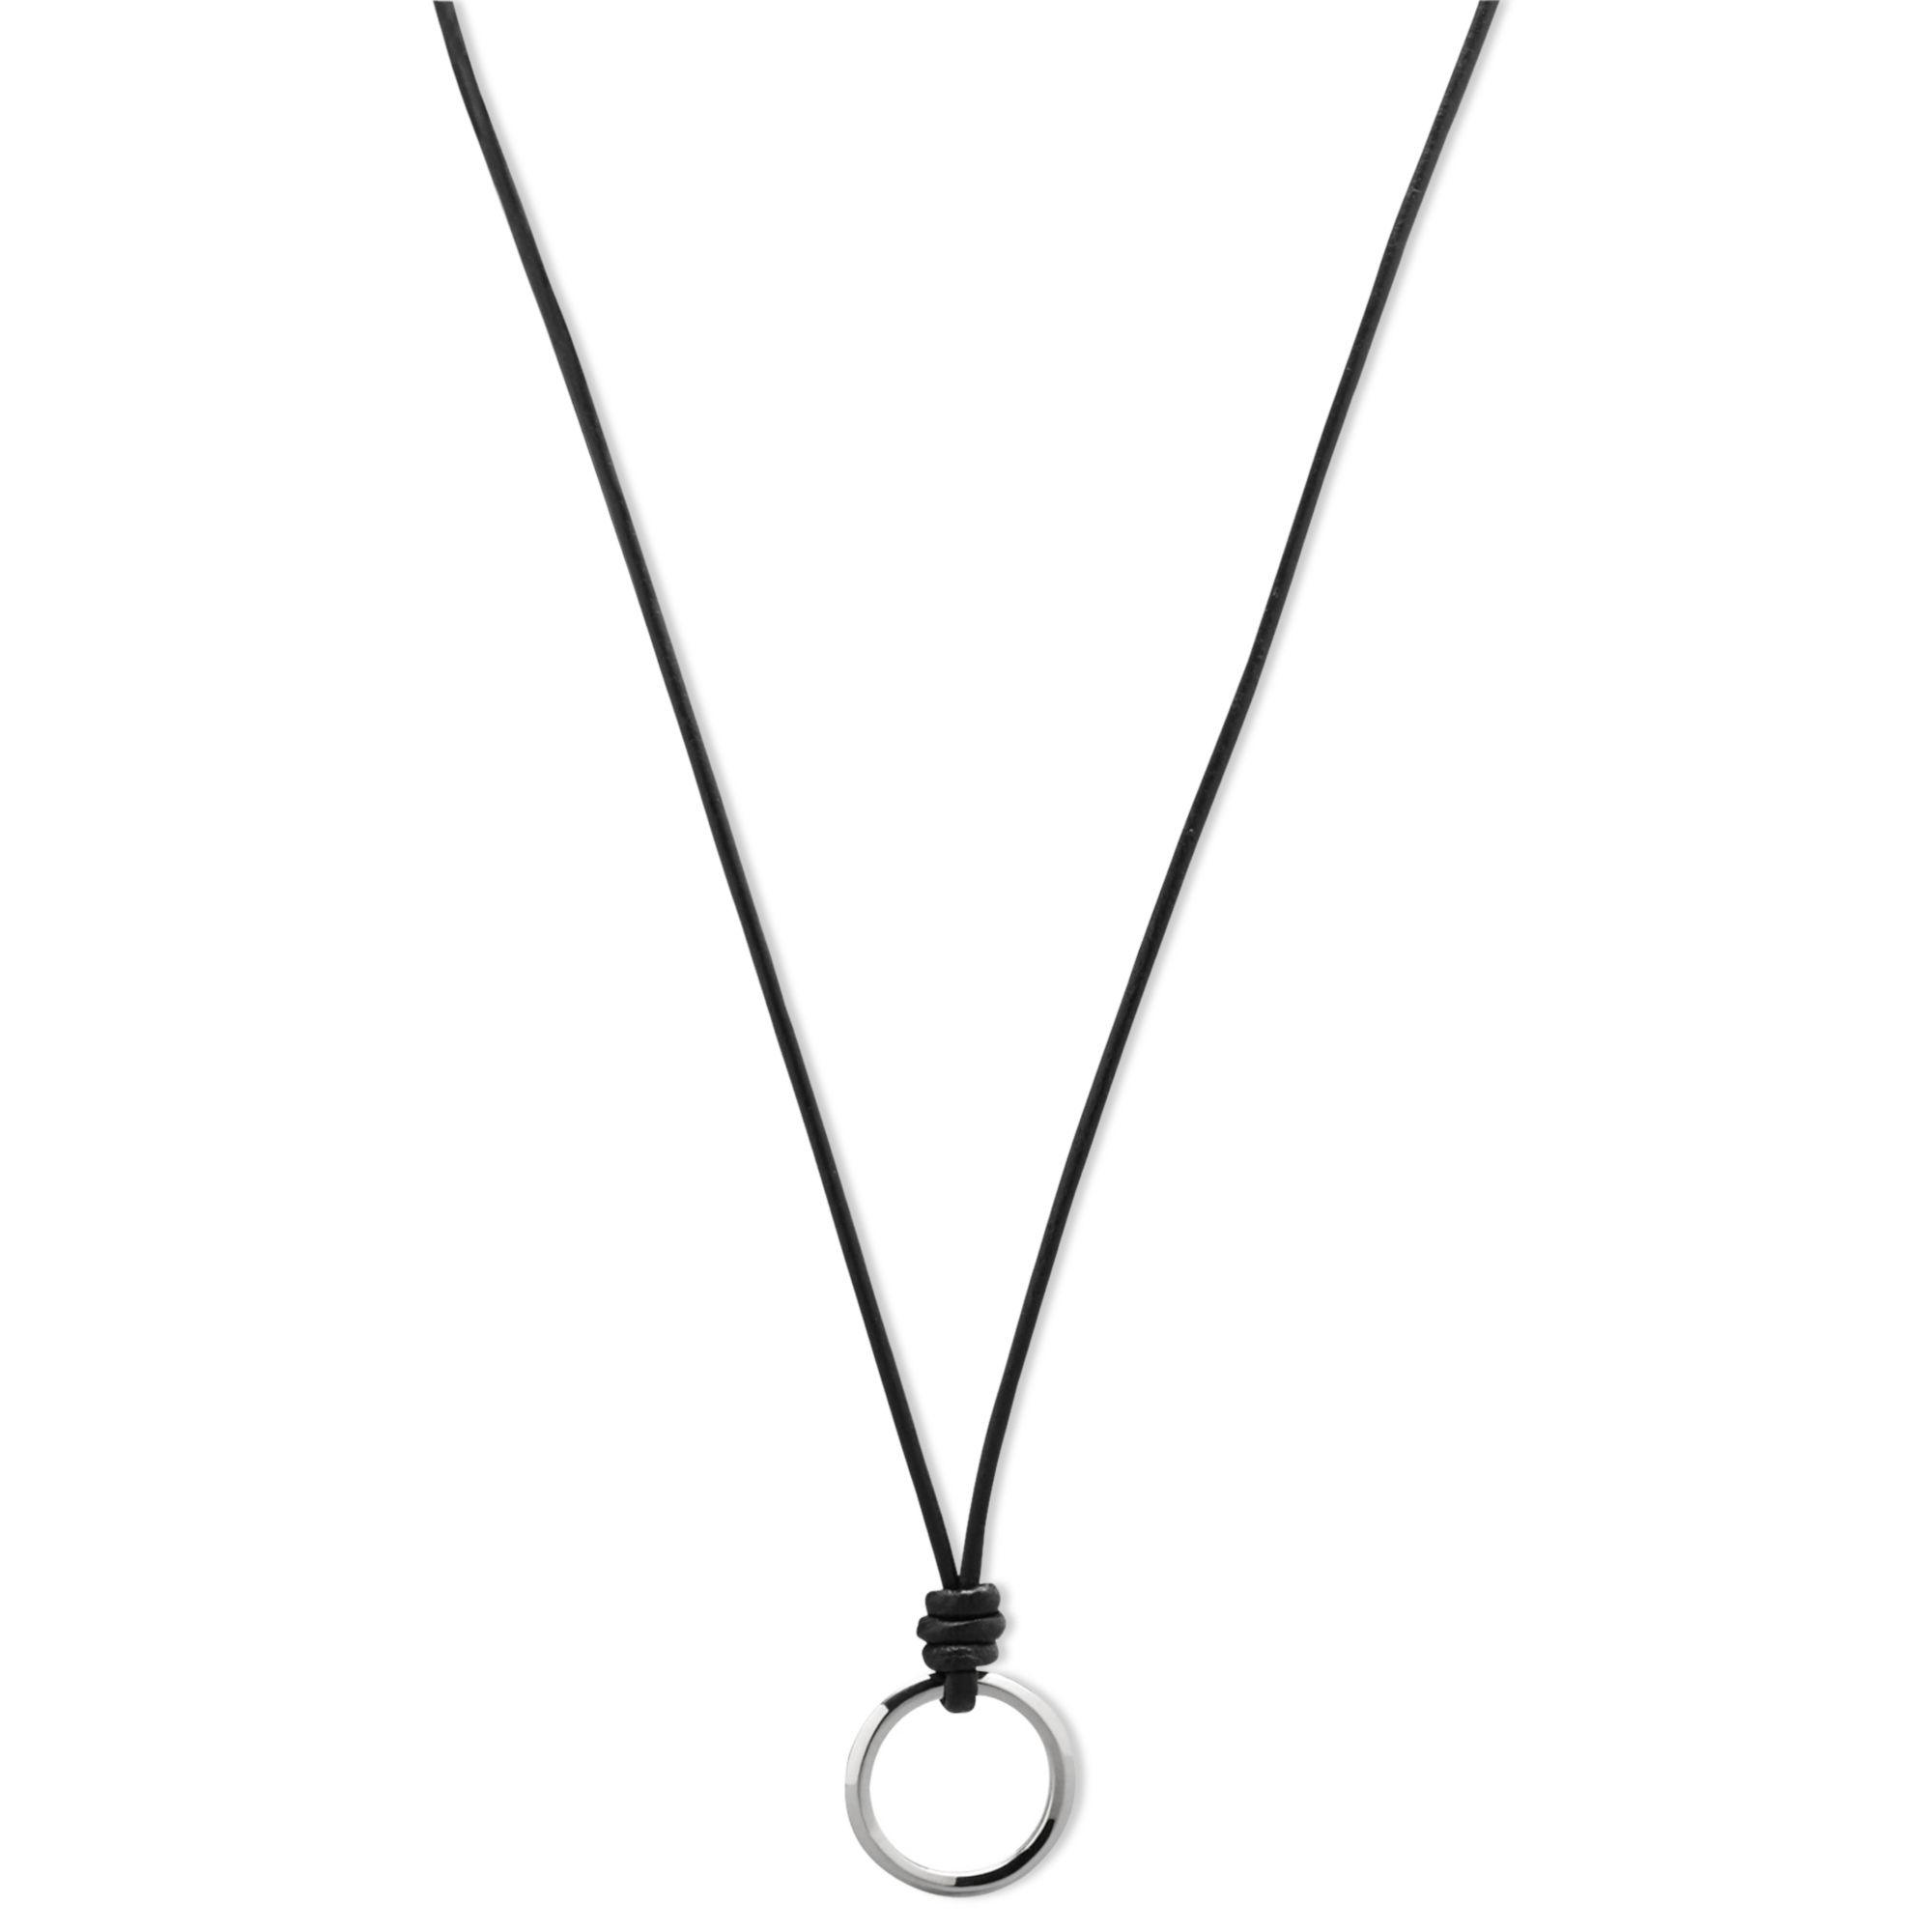 Fossil Leather Cord Silvertone Charm Necklace in Black